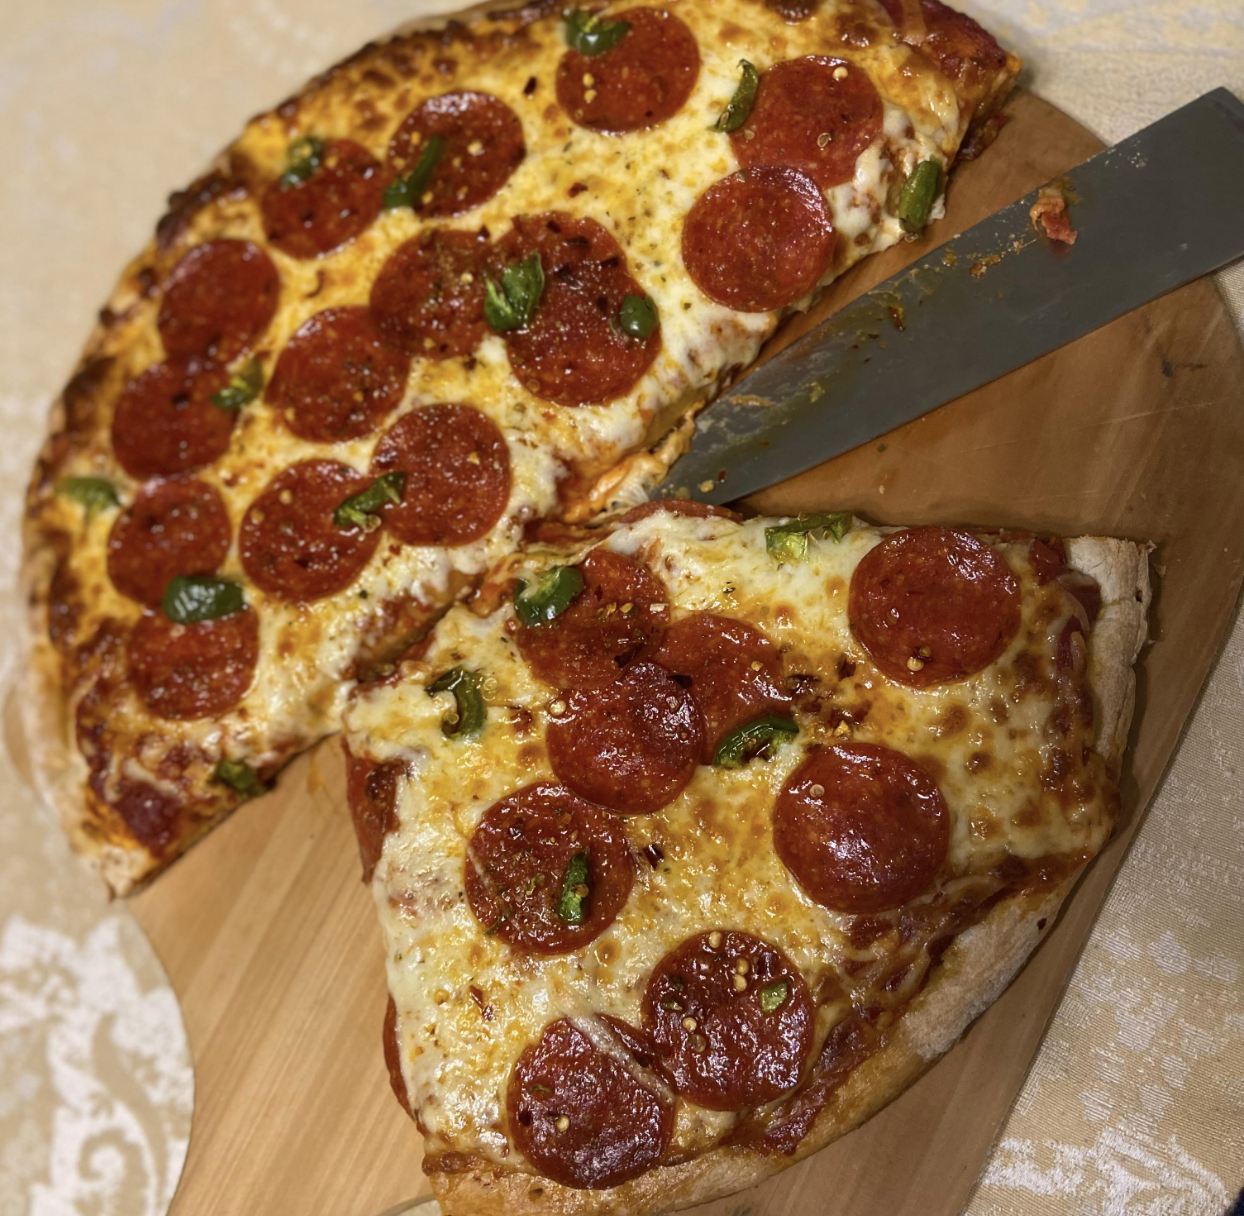 A pizza cut wrongly